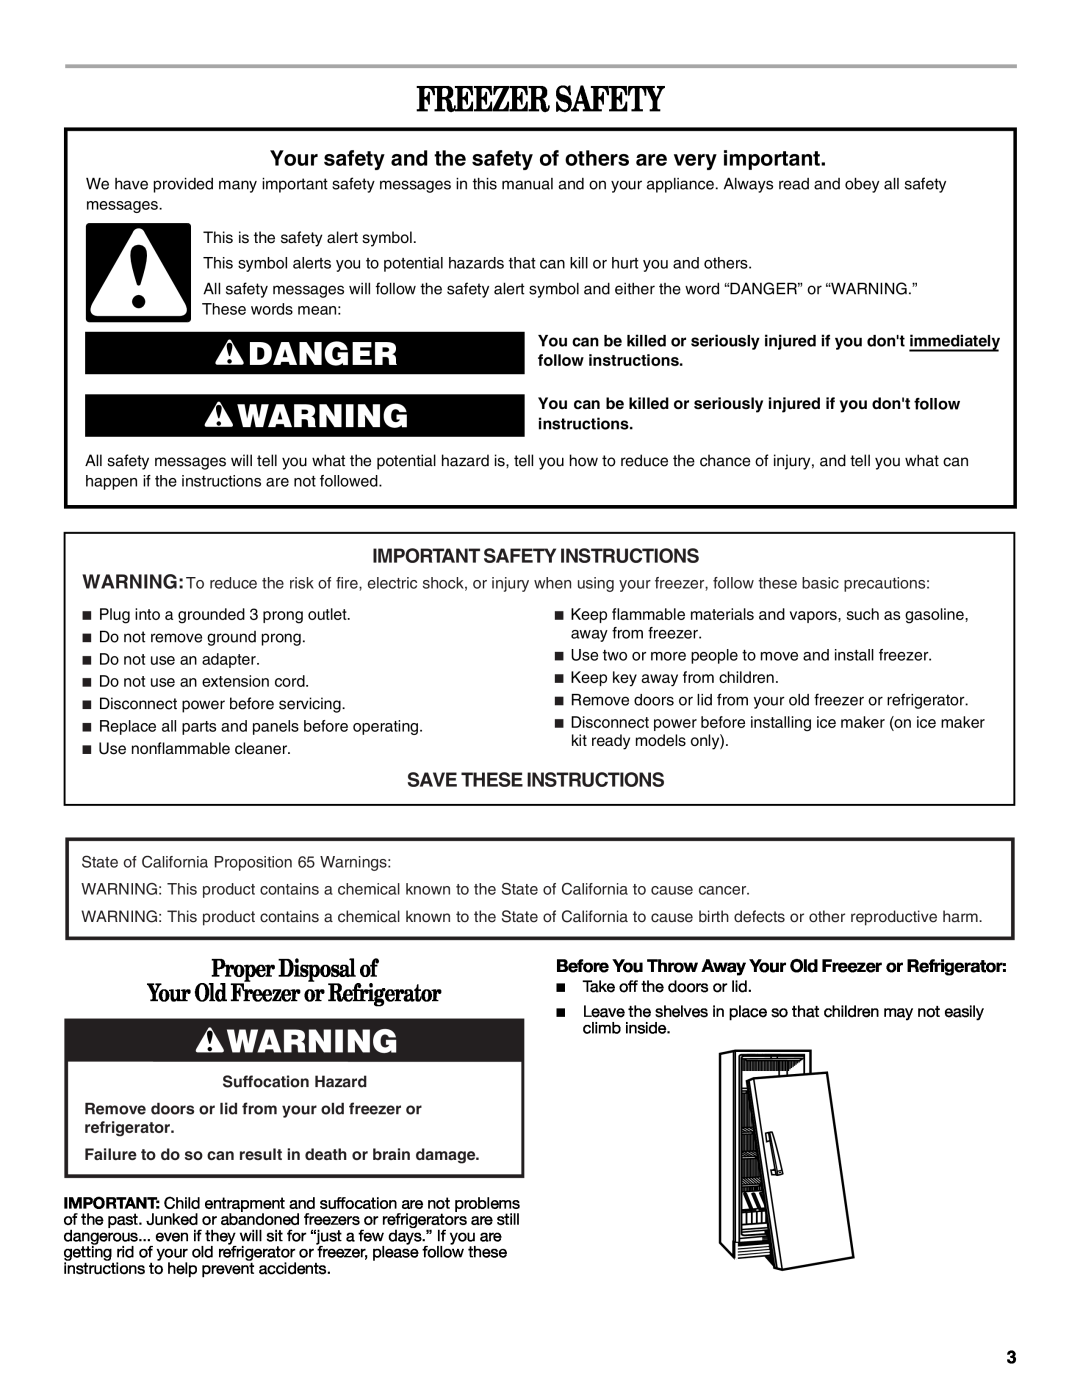 Amana W10326797A Freezer Safety, Danger, Proper Disposal of Your Old Freezer or Refrigerator, Save These Instructions 